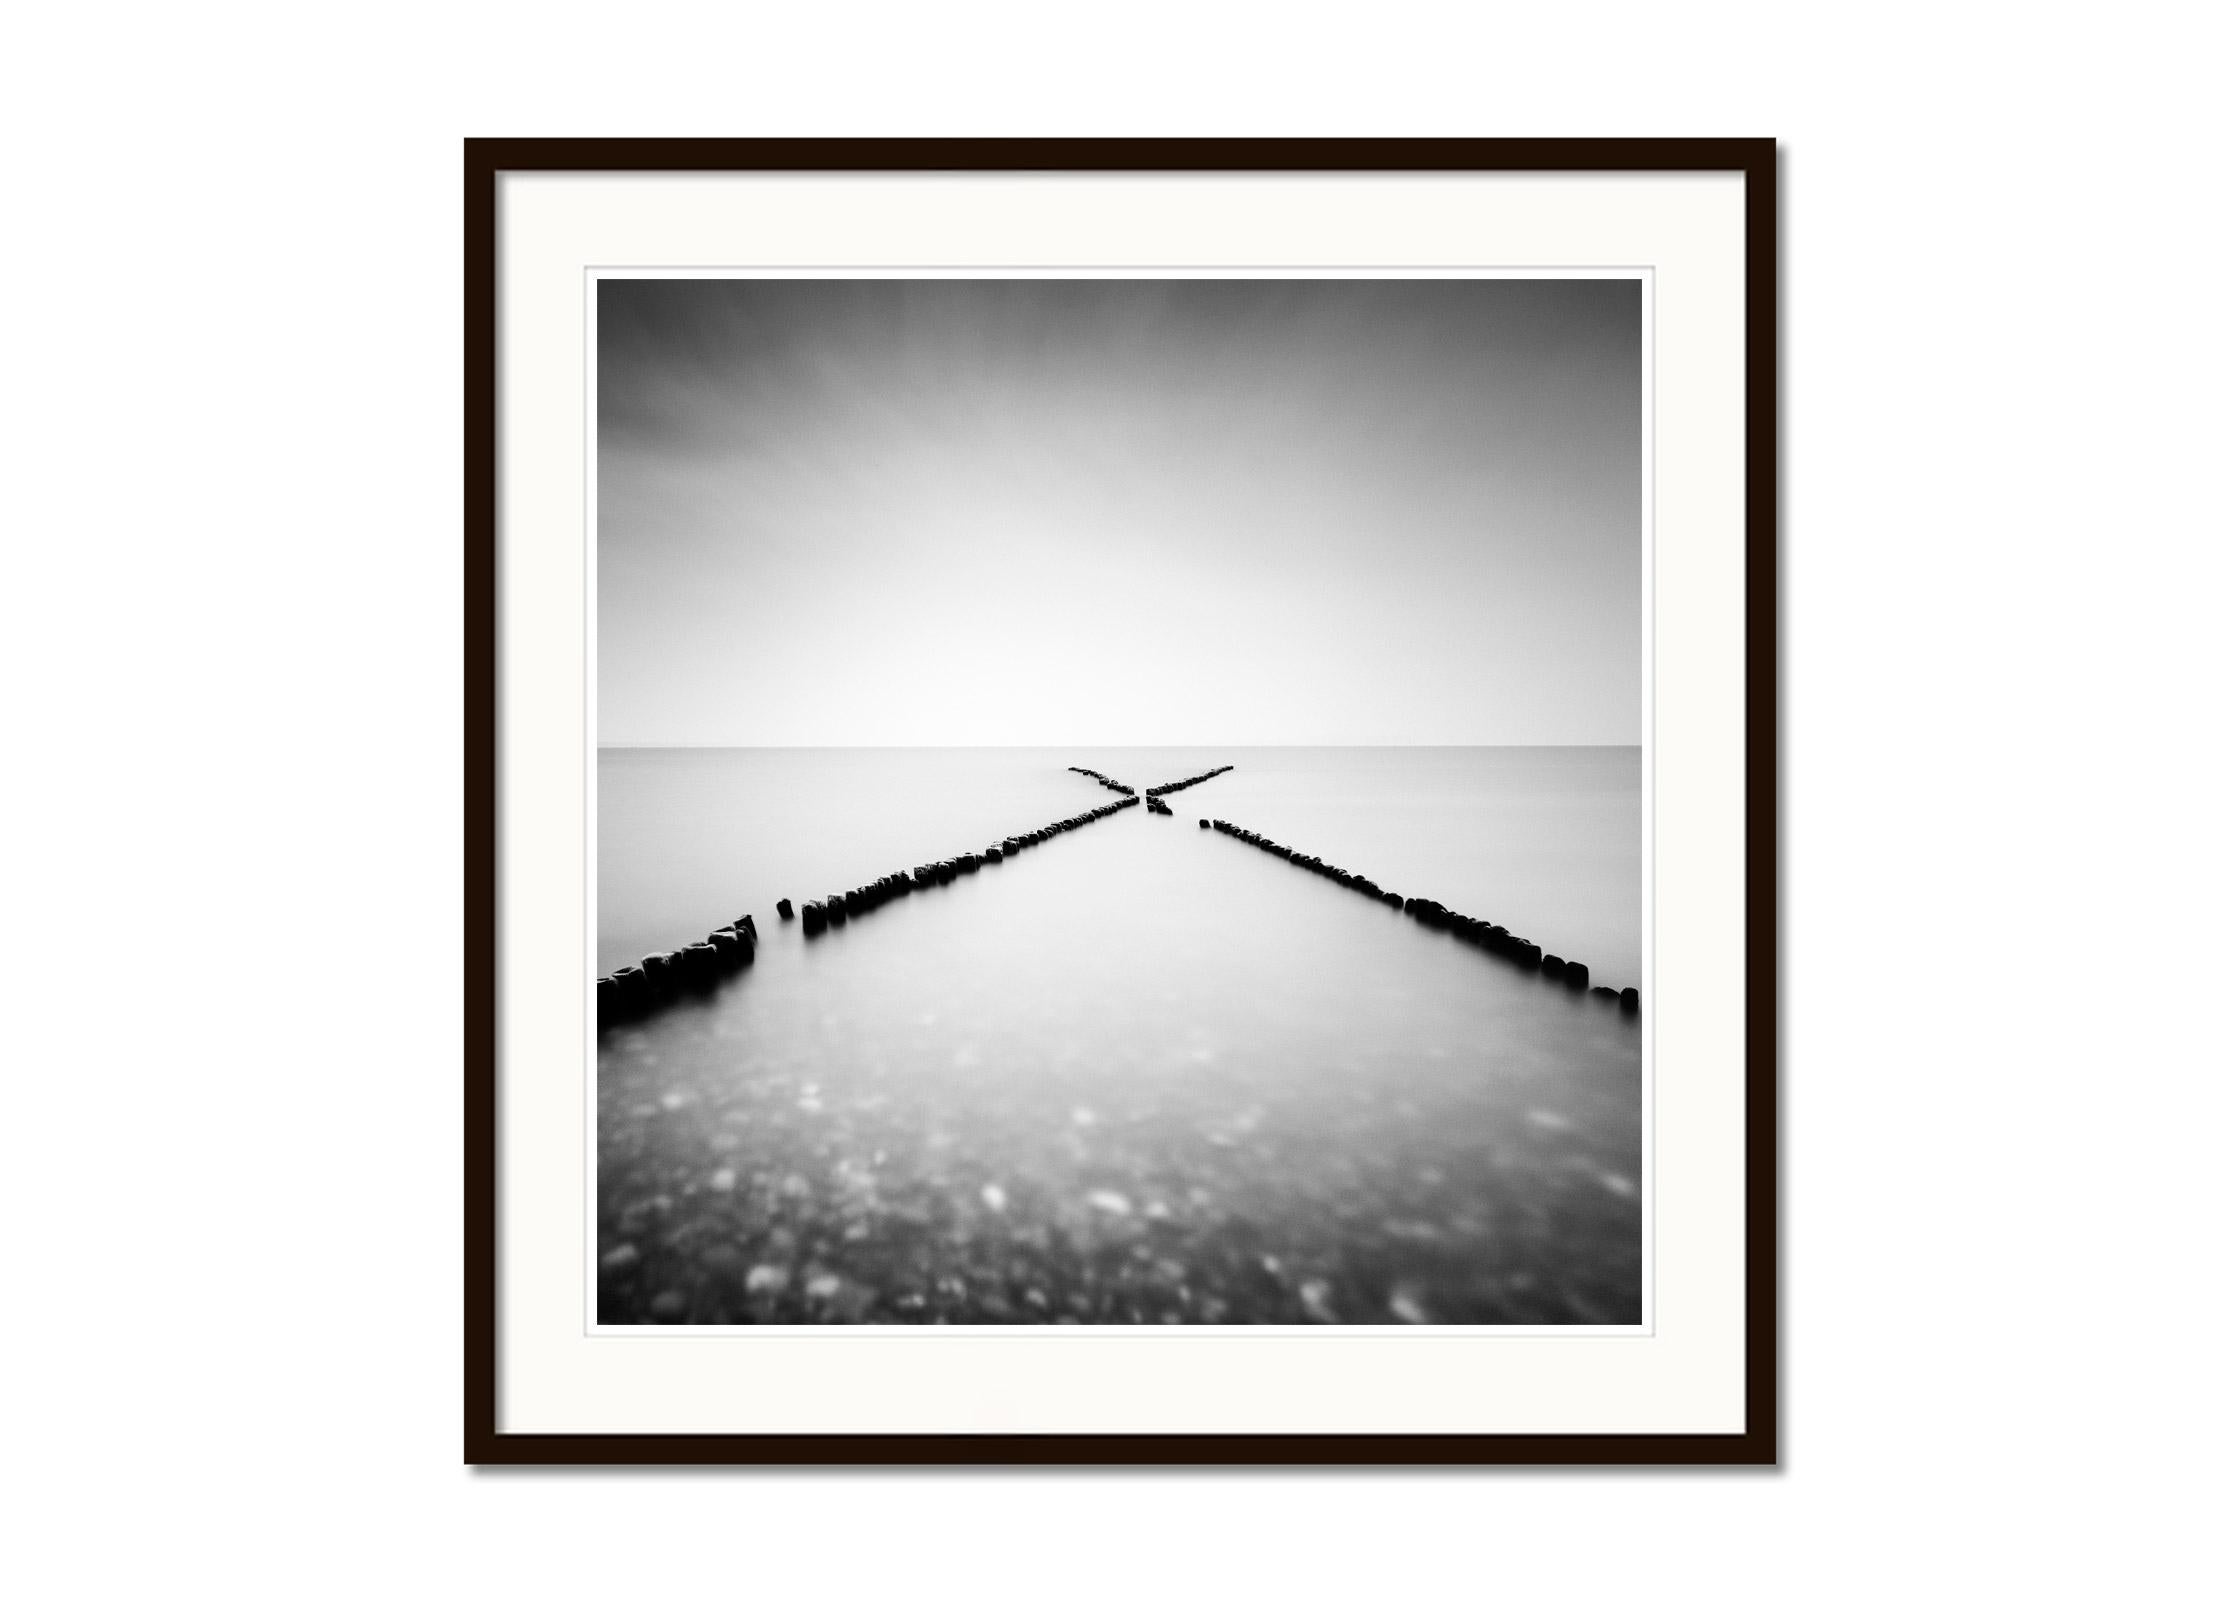 X - Factor, Sylt, Germany, long exposure, black and white waterscape photography - Gray Landscape Photograph by Gerald Berghammer